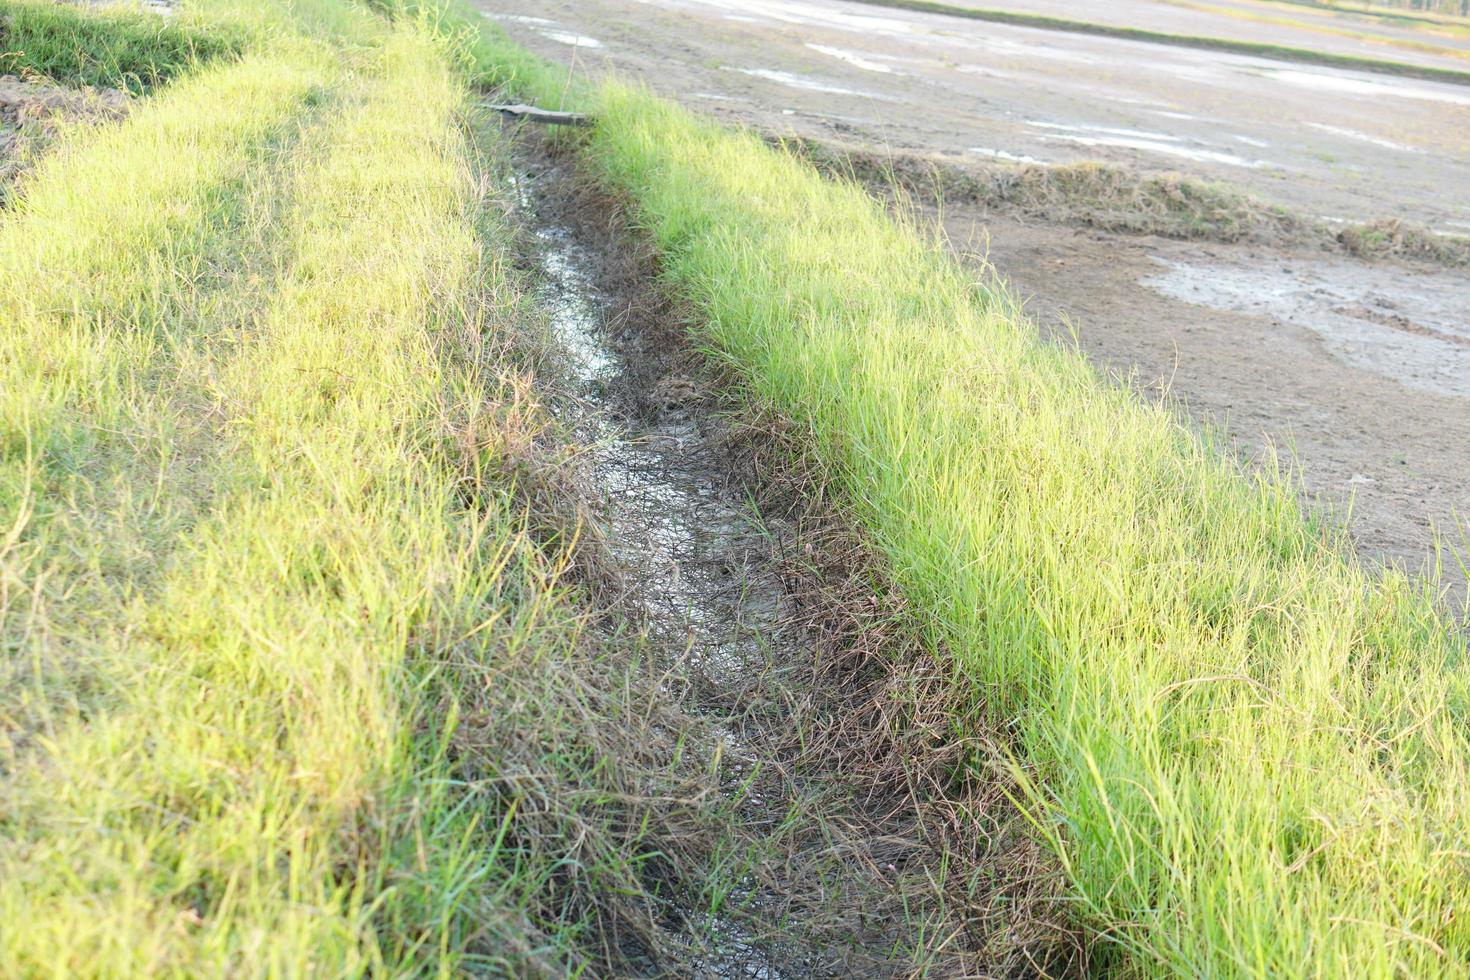 Land preparation for rice planting in Thailand photo